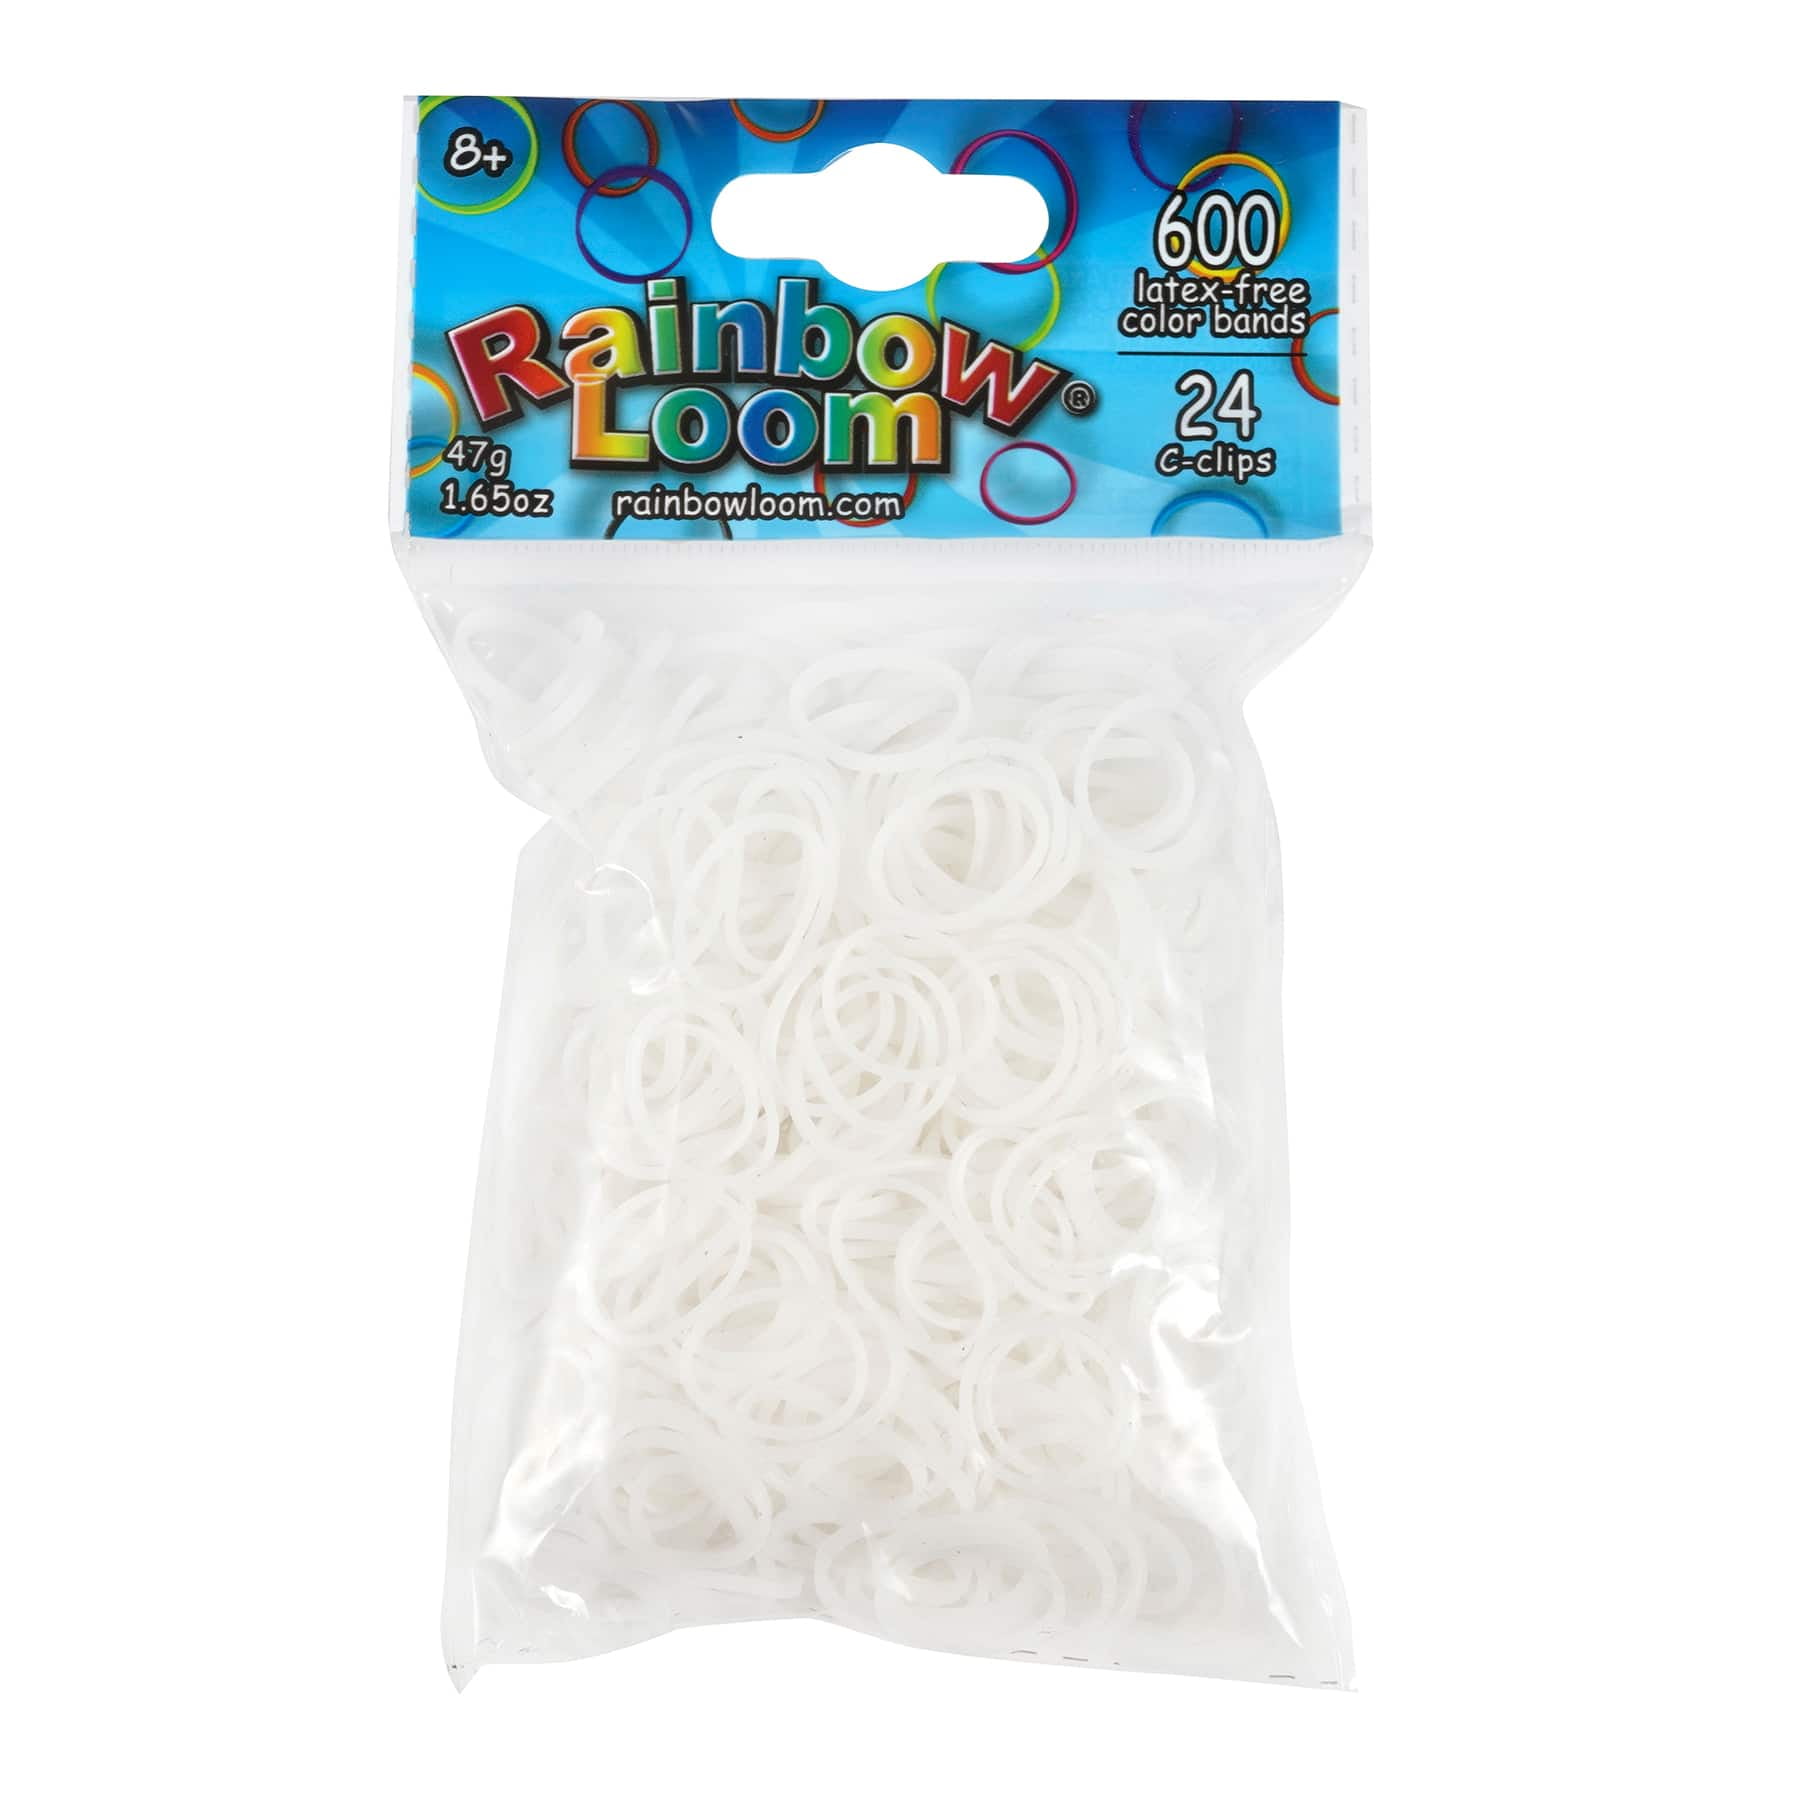 12 Pack: Rainbow Loom® Neon Refill Bands